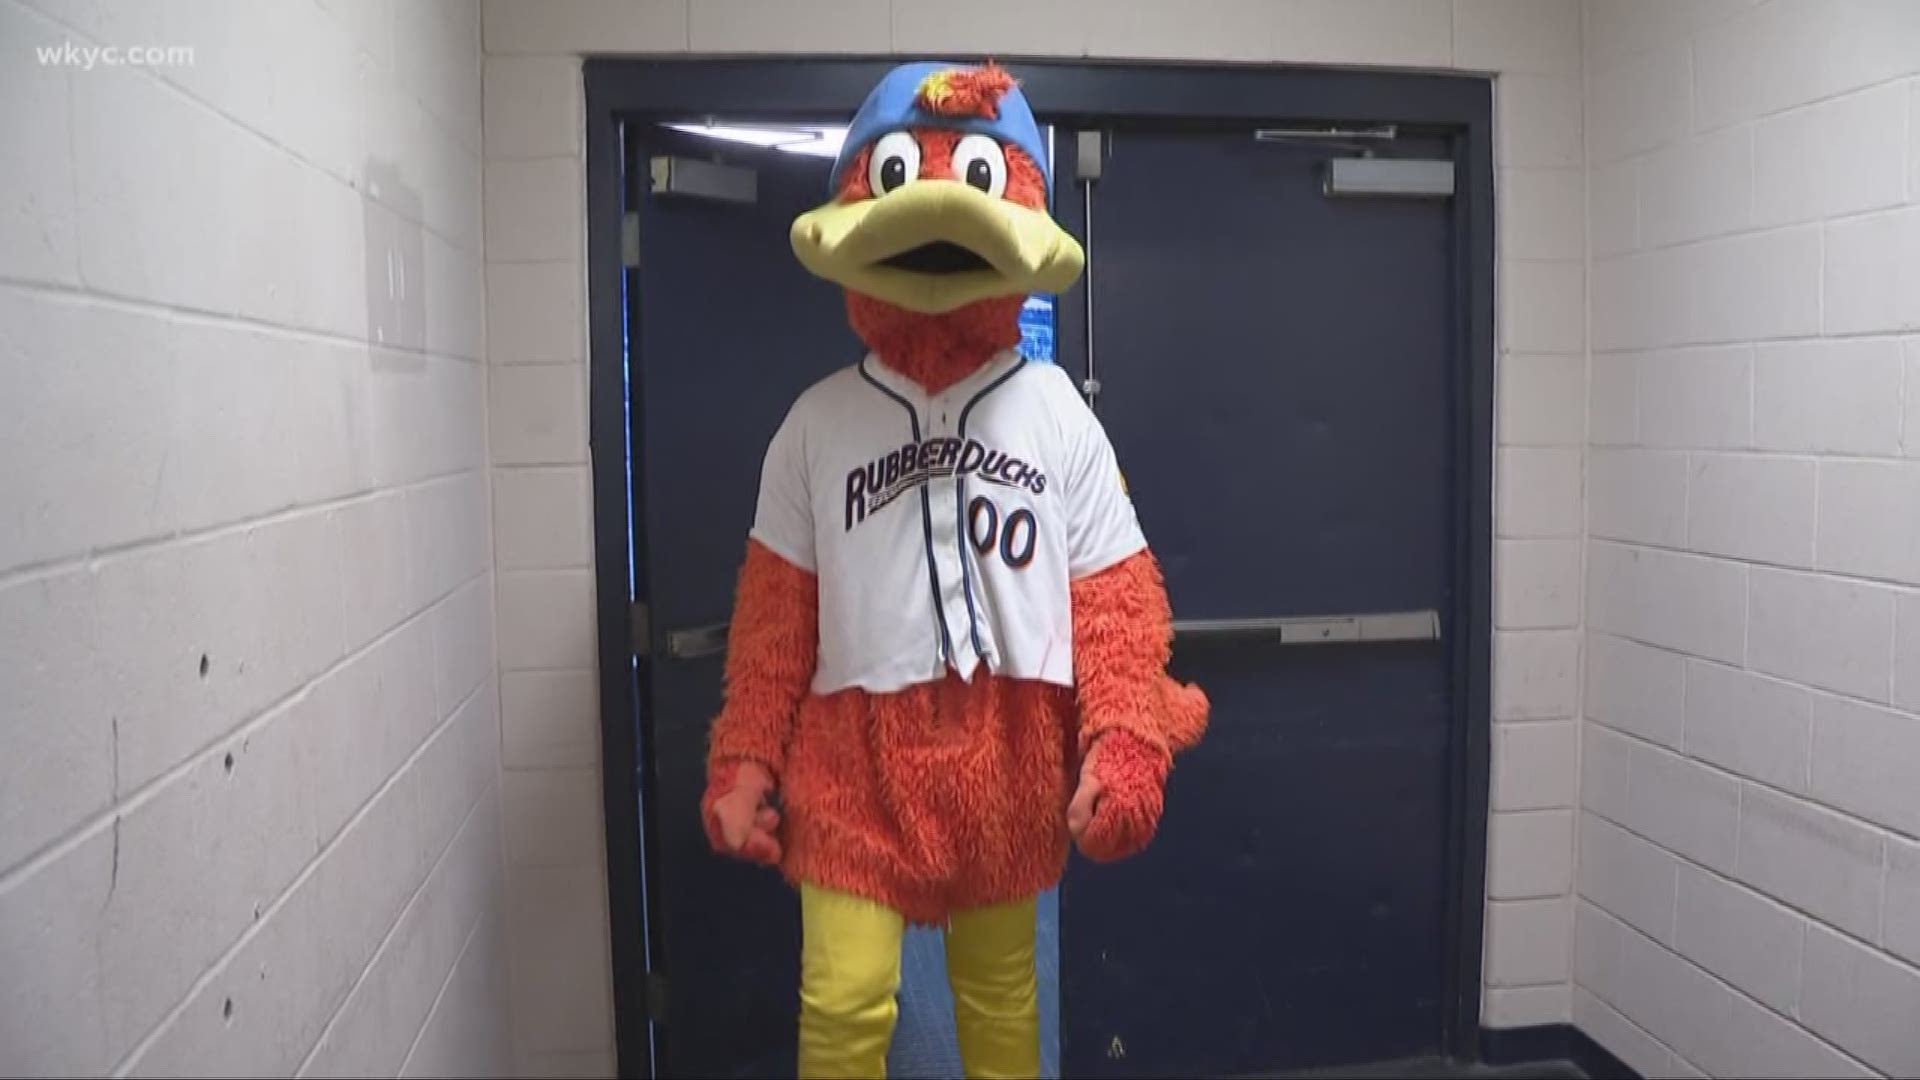 March 14, 2019: What does it take to become a mascot with the Akron Rubberducks baseball team? Our own Austin Love gave it a try.